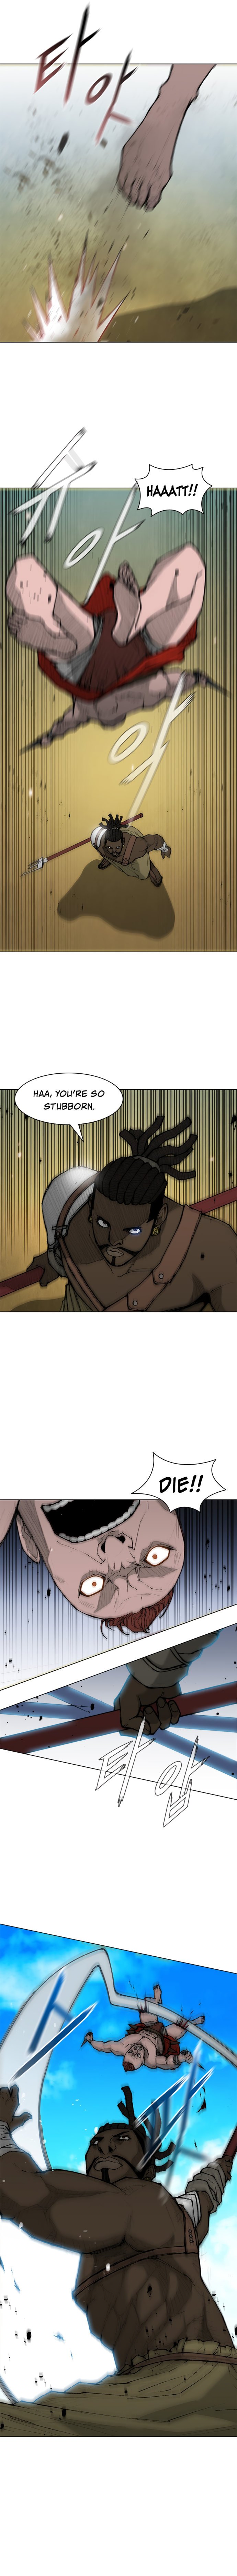 long-way-of-the-warrior-chap-37-6